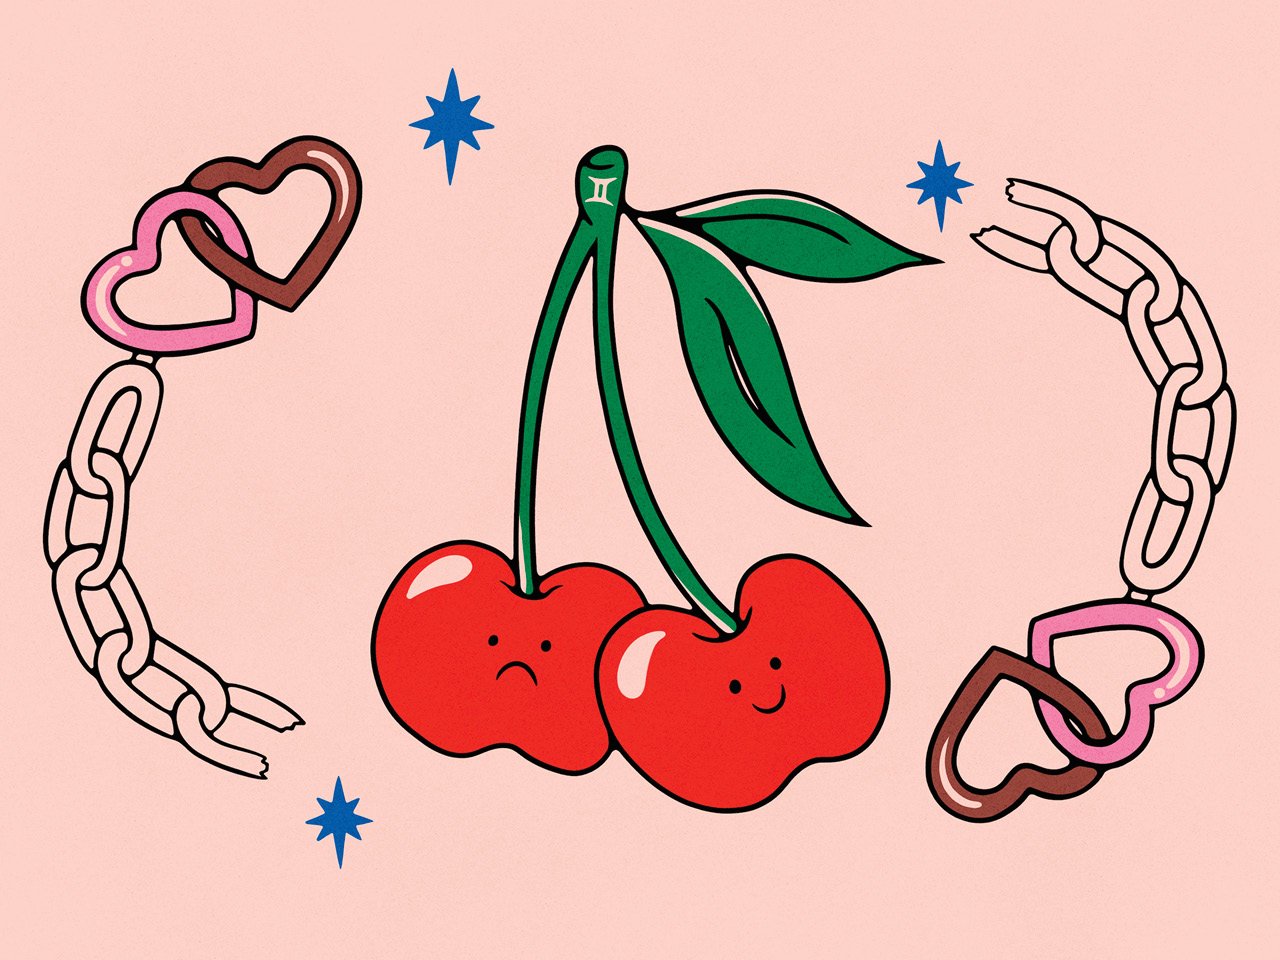 An illustration of a pair of cherries connected at the stem. One cherry has a smiley face and the other has a sad face. On the tip of the stem, there's a pair of leaves and a small gemini symbol